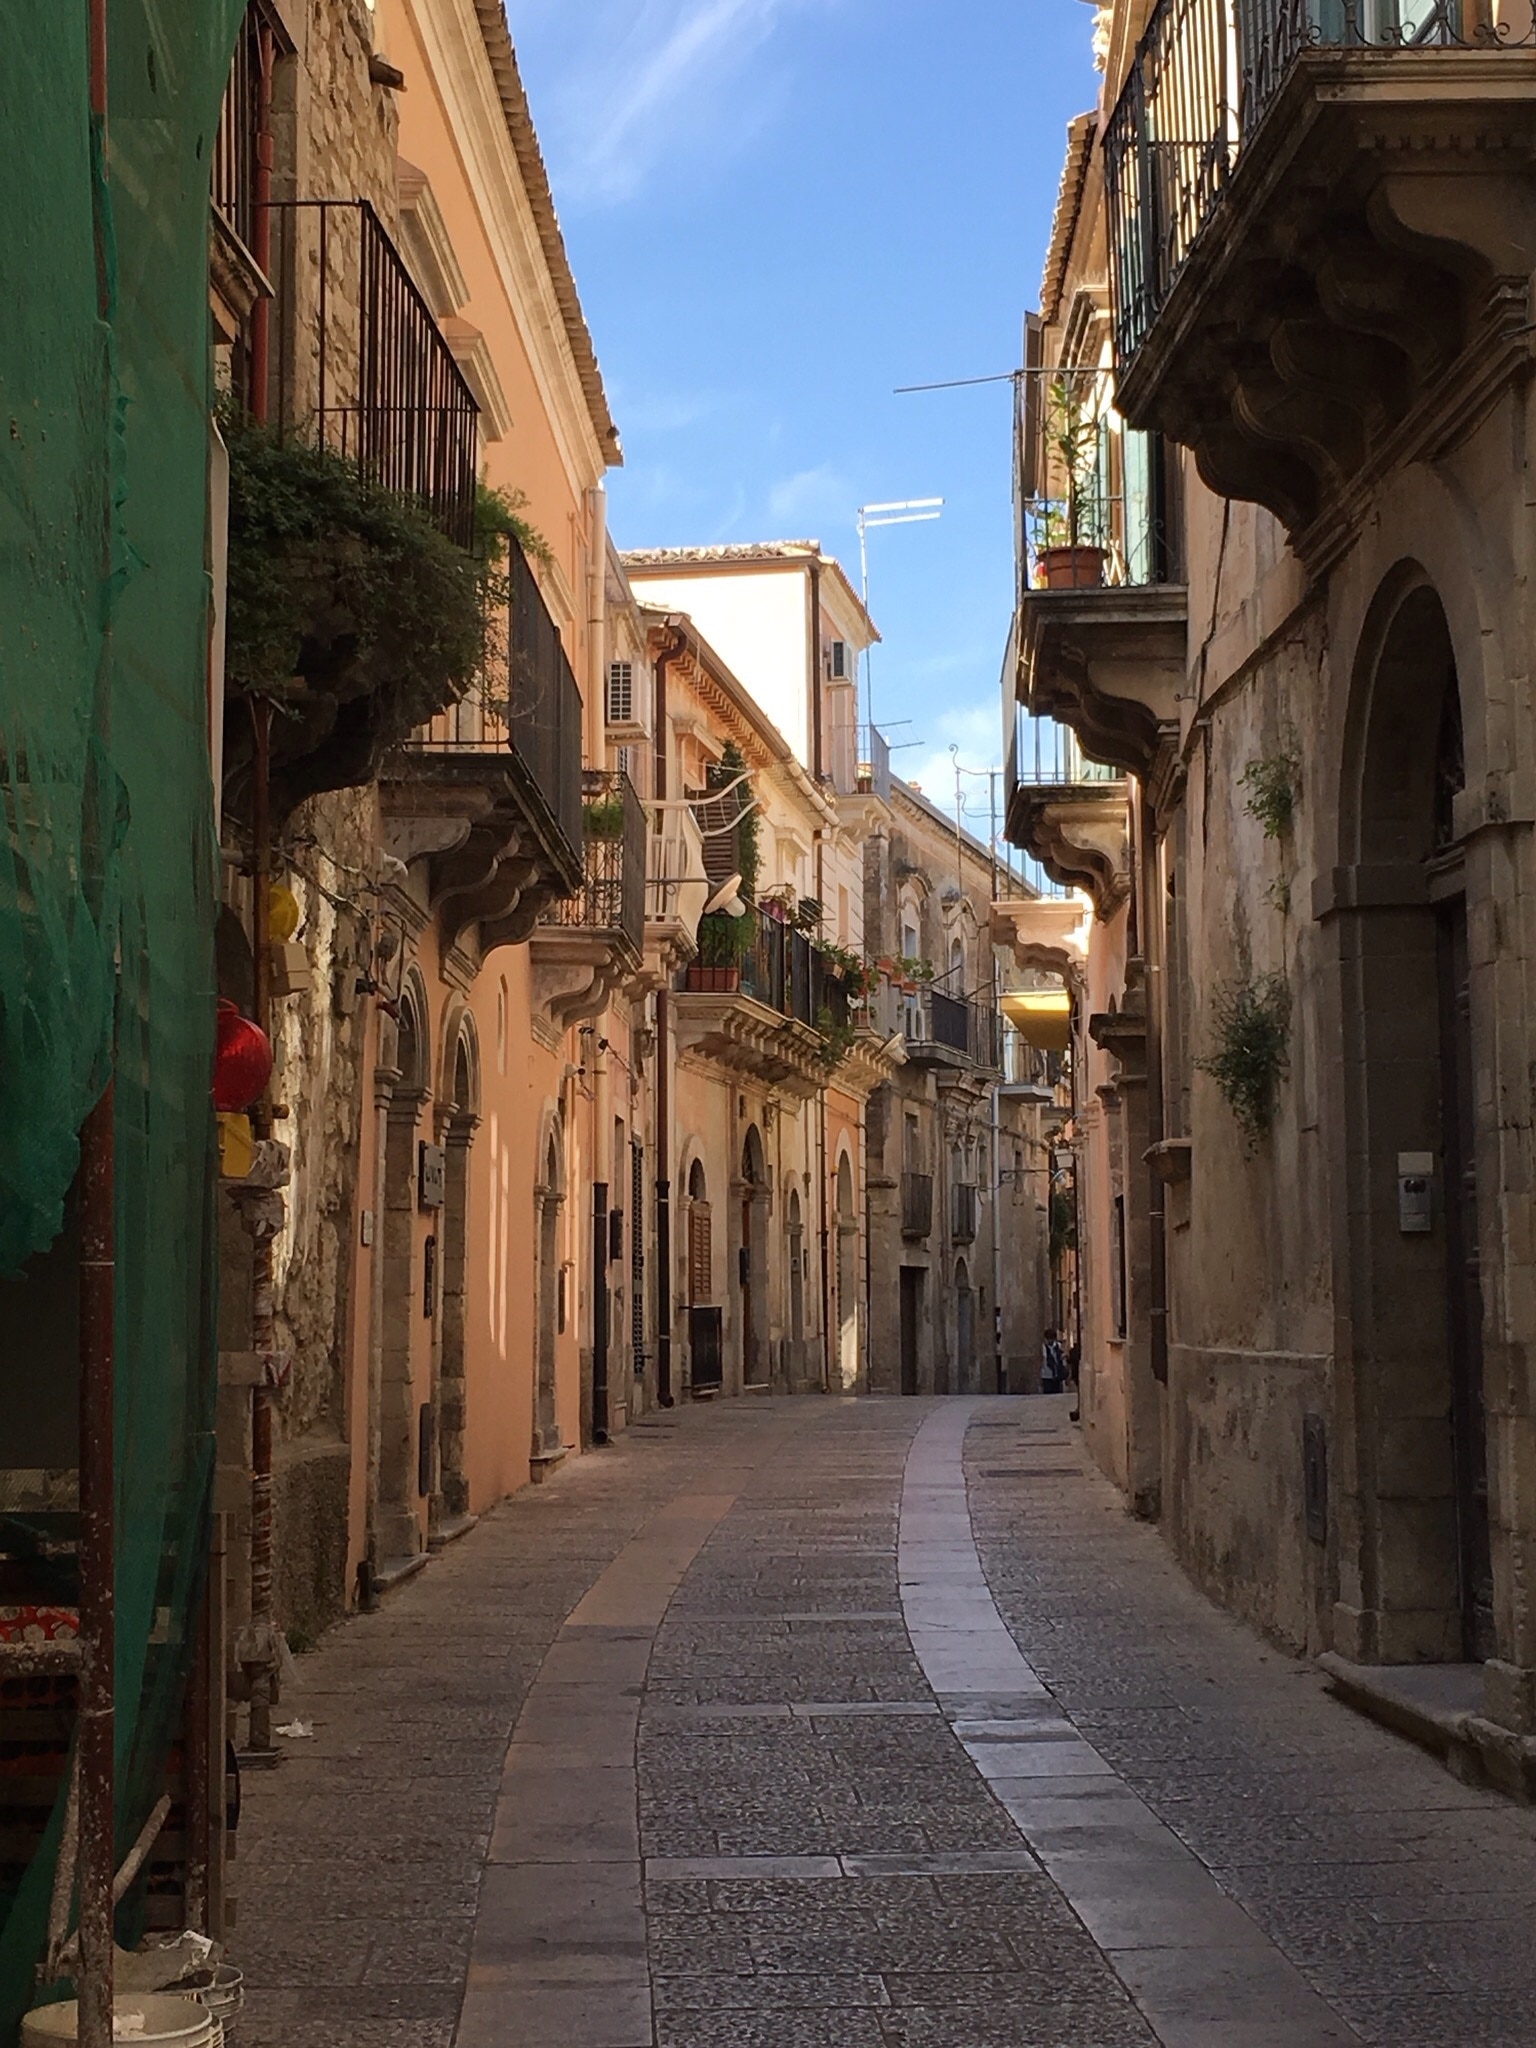 Looking at some of the pictures on how quaint, I thought this also fitted. One of many beautiful little narrow streets in Sicily, this one is in Ragusa, beautiful baroque buildings